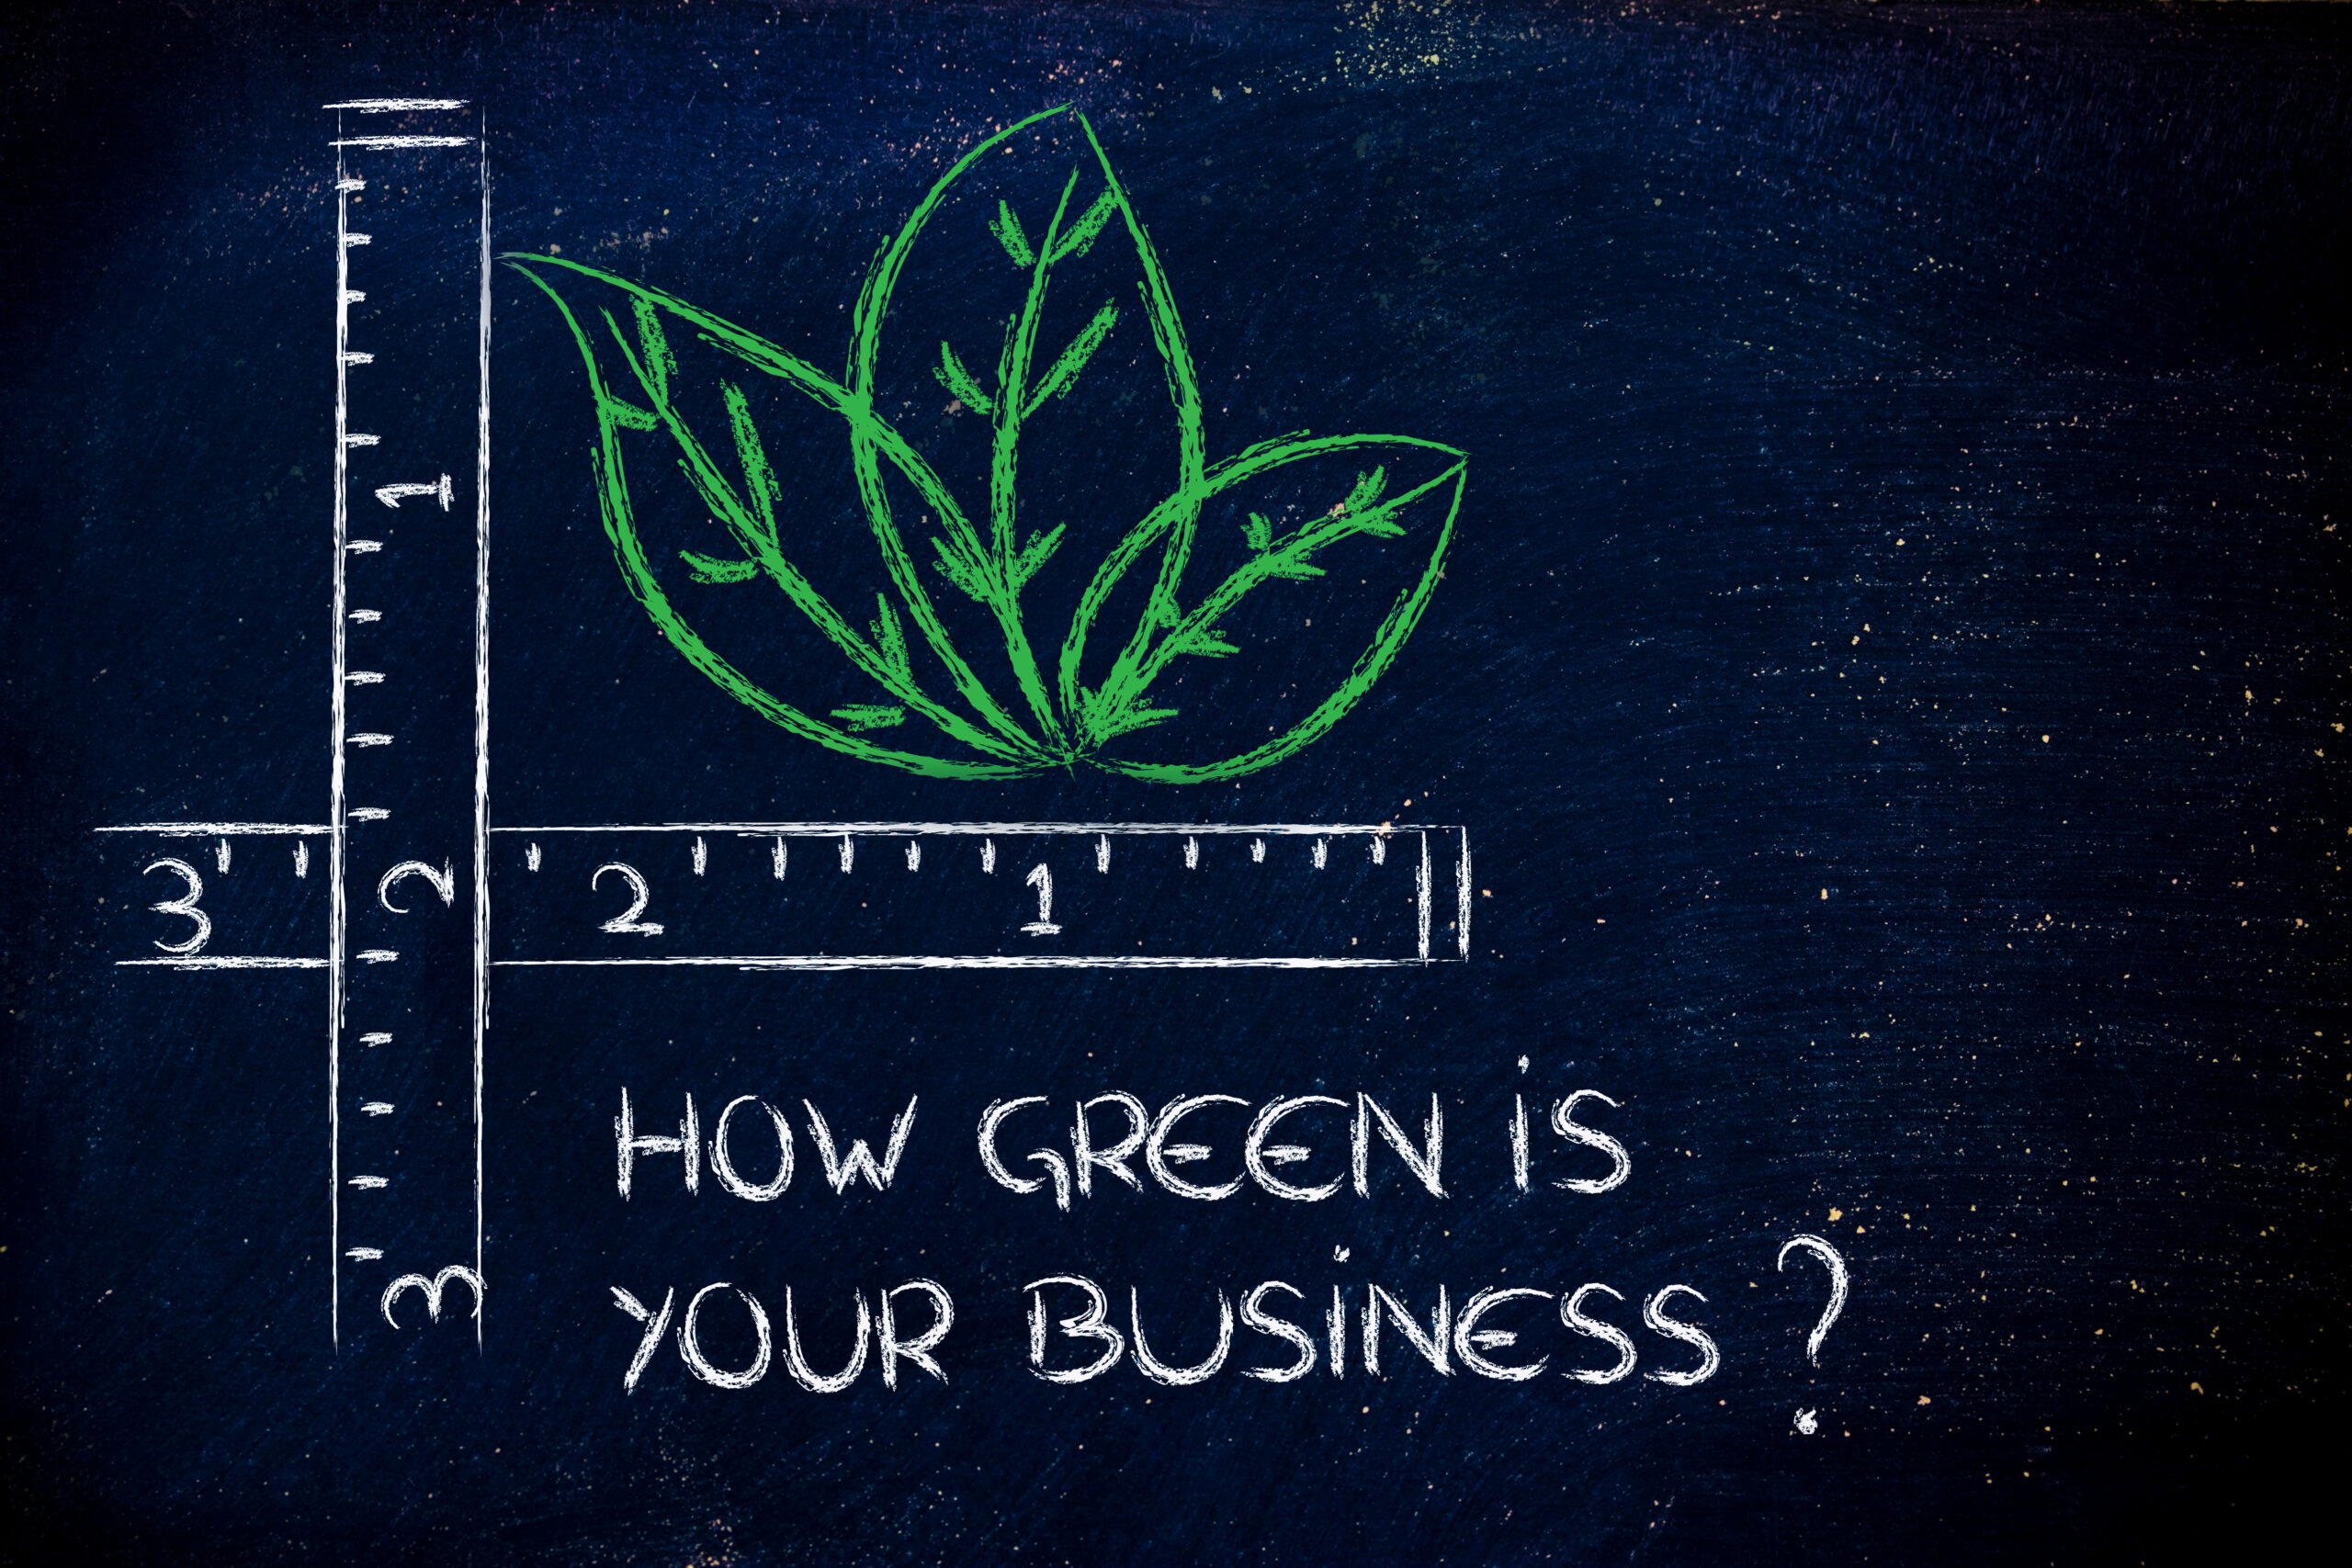 Illustration on blackboard that shows rulers crossing with a caption, "How Green is Your Business?"